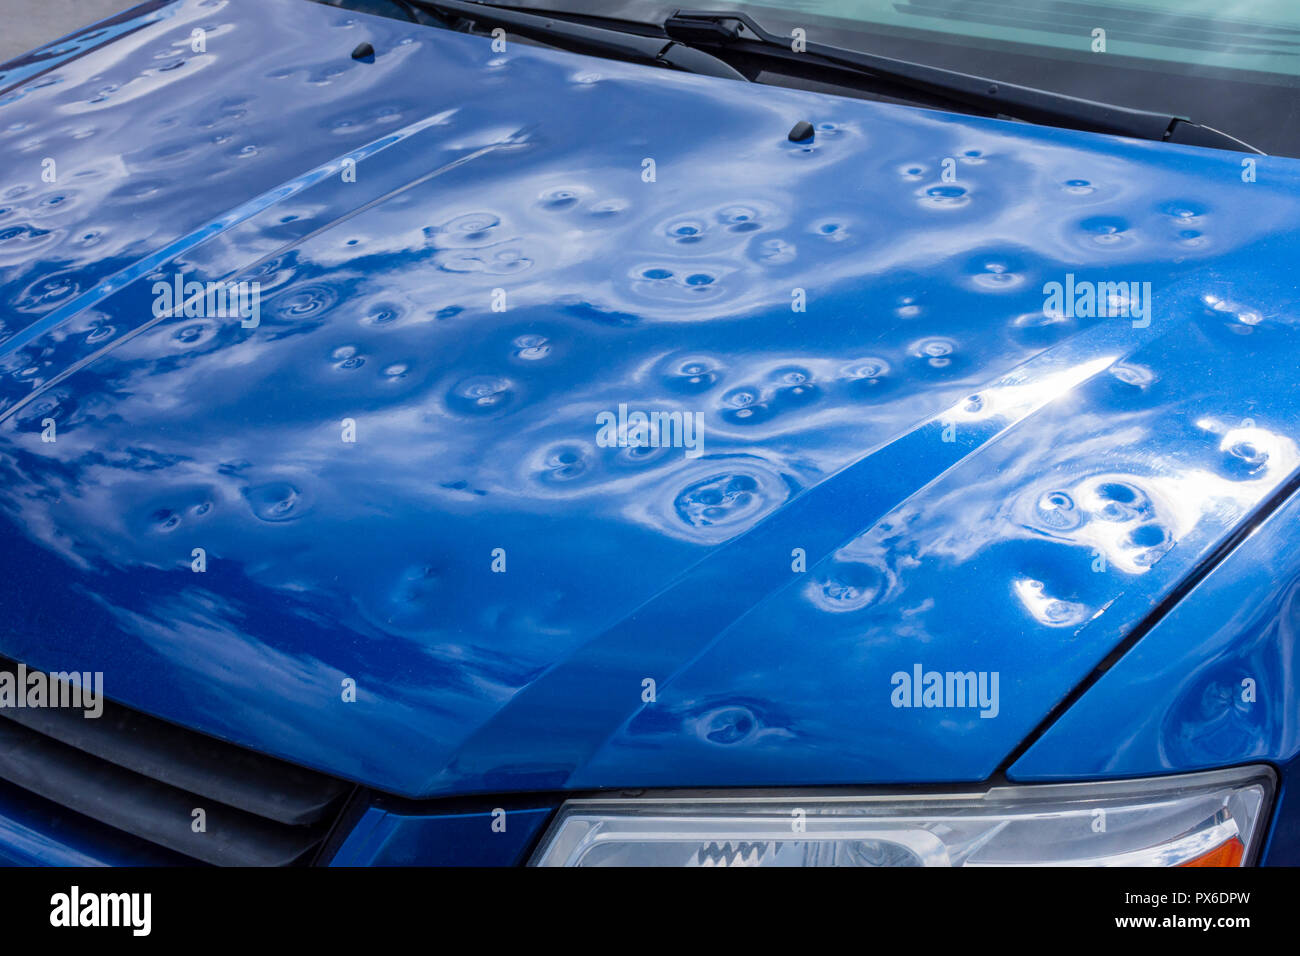 Severe hail damage to the hood of automobile, Aurora Colorado USA. Storm occurred in July 2016. Stock Photo